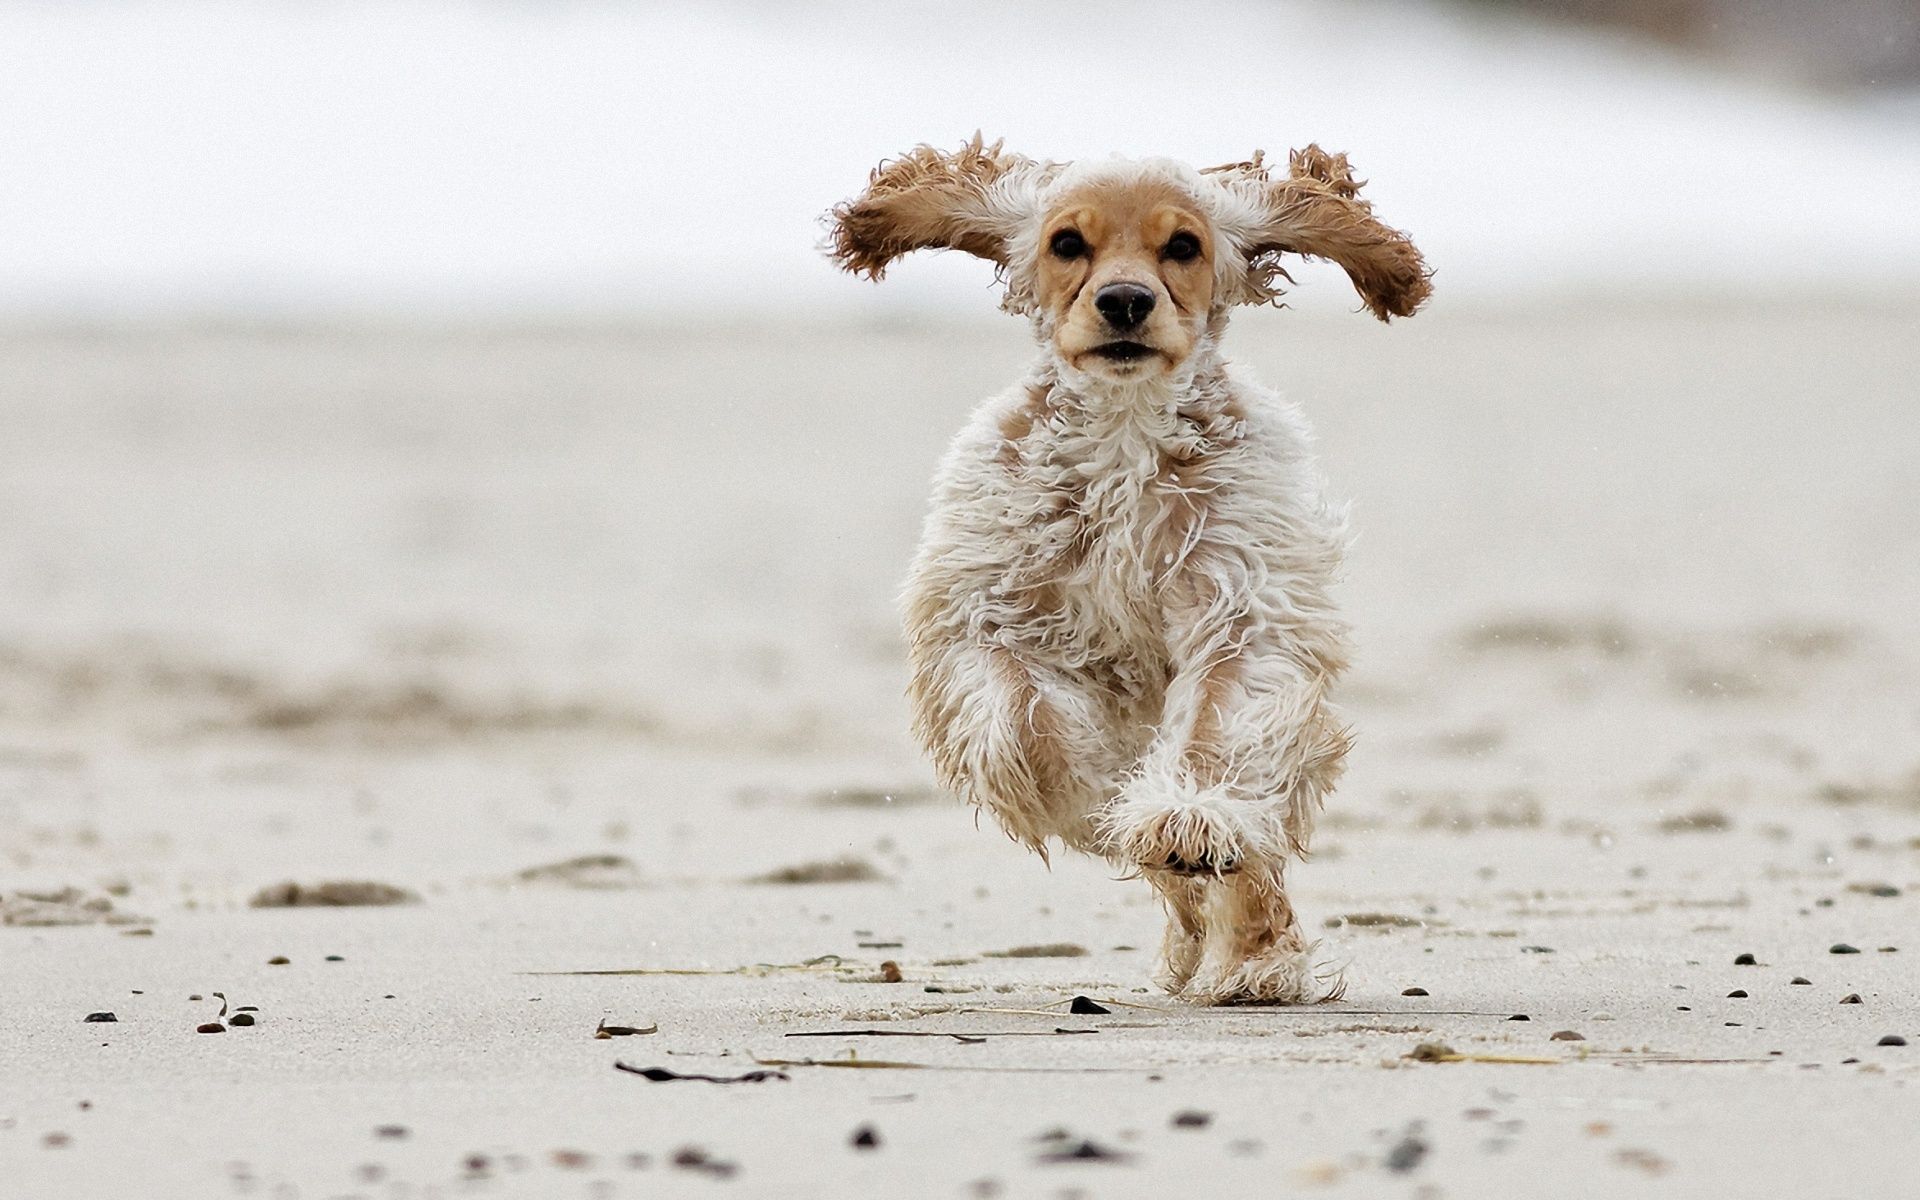 American Cocker Spaniel running on sand wallpapers and images